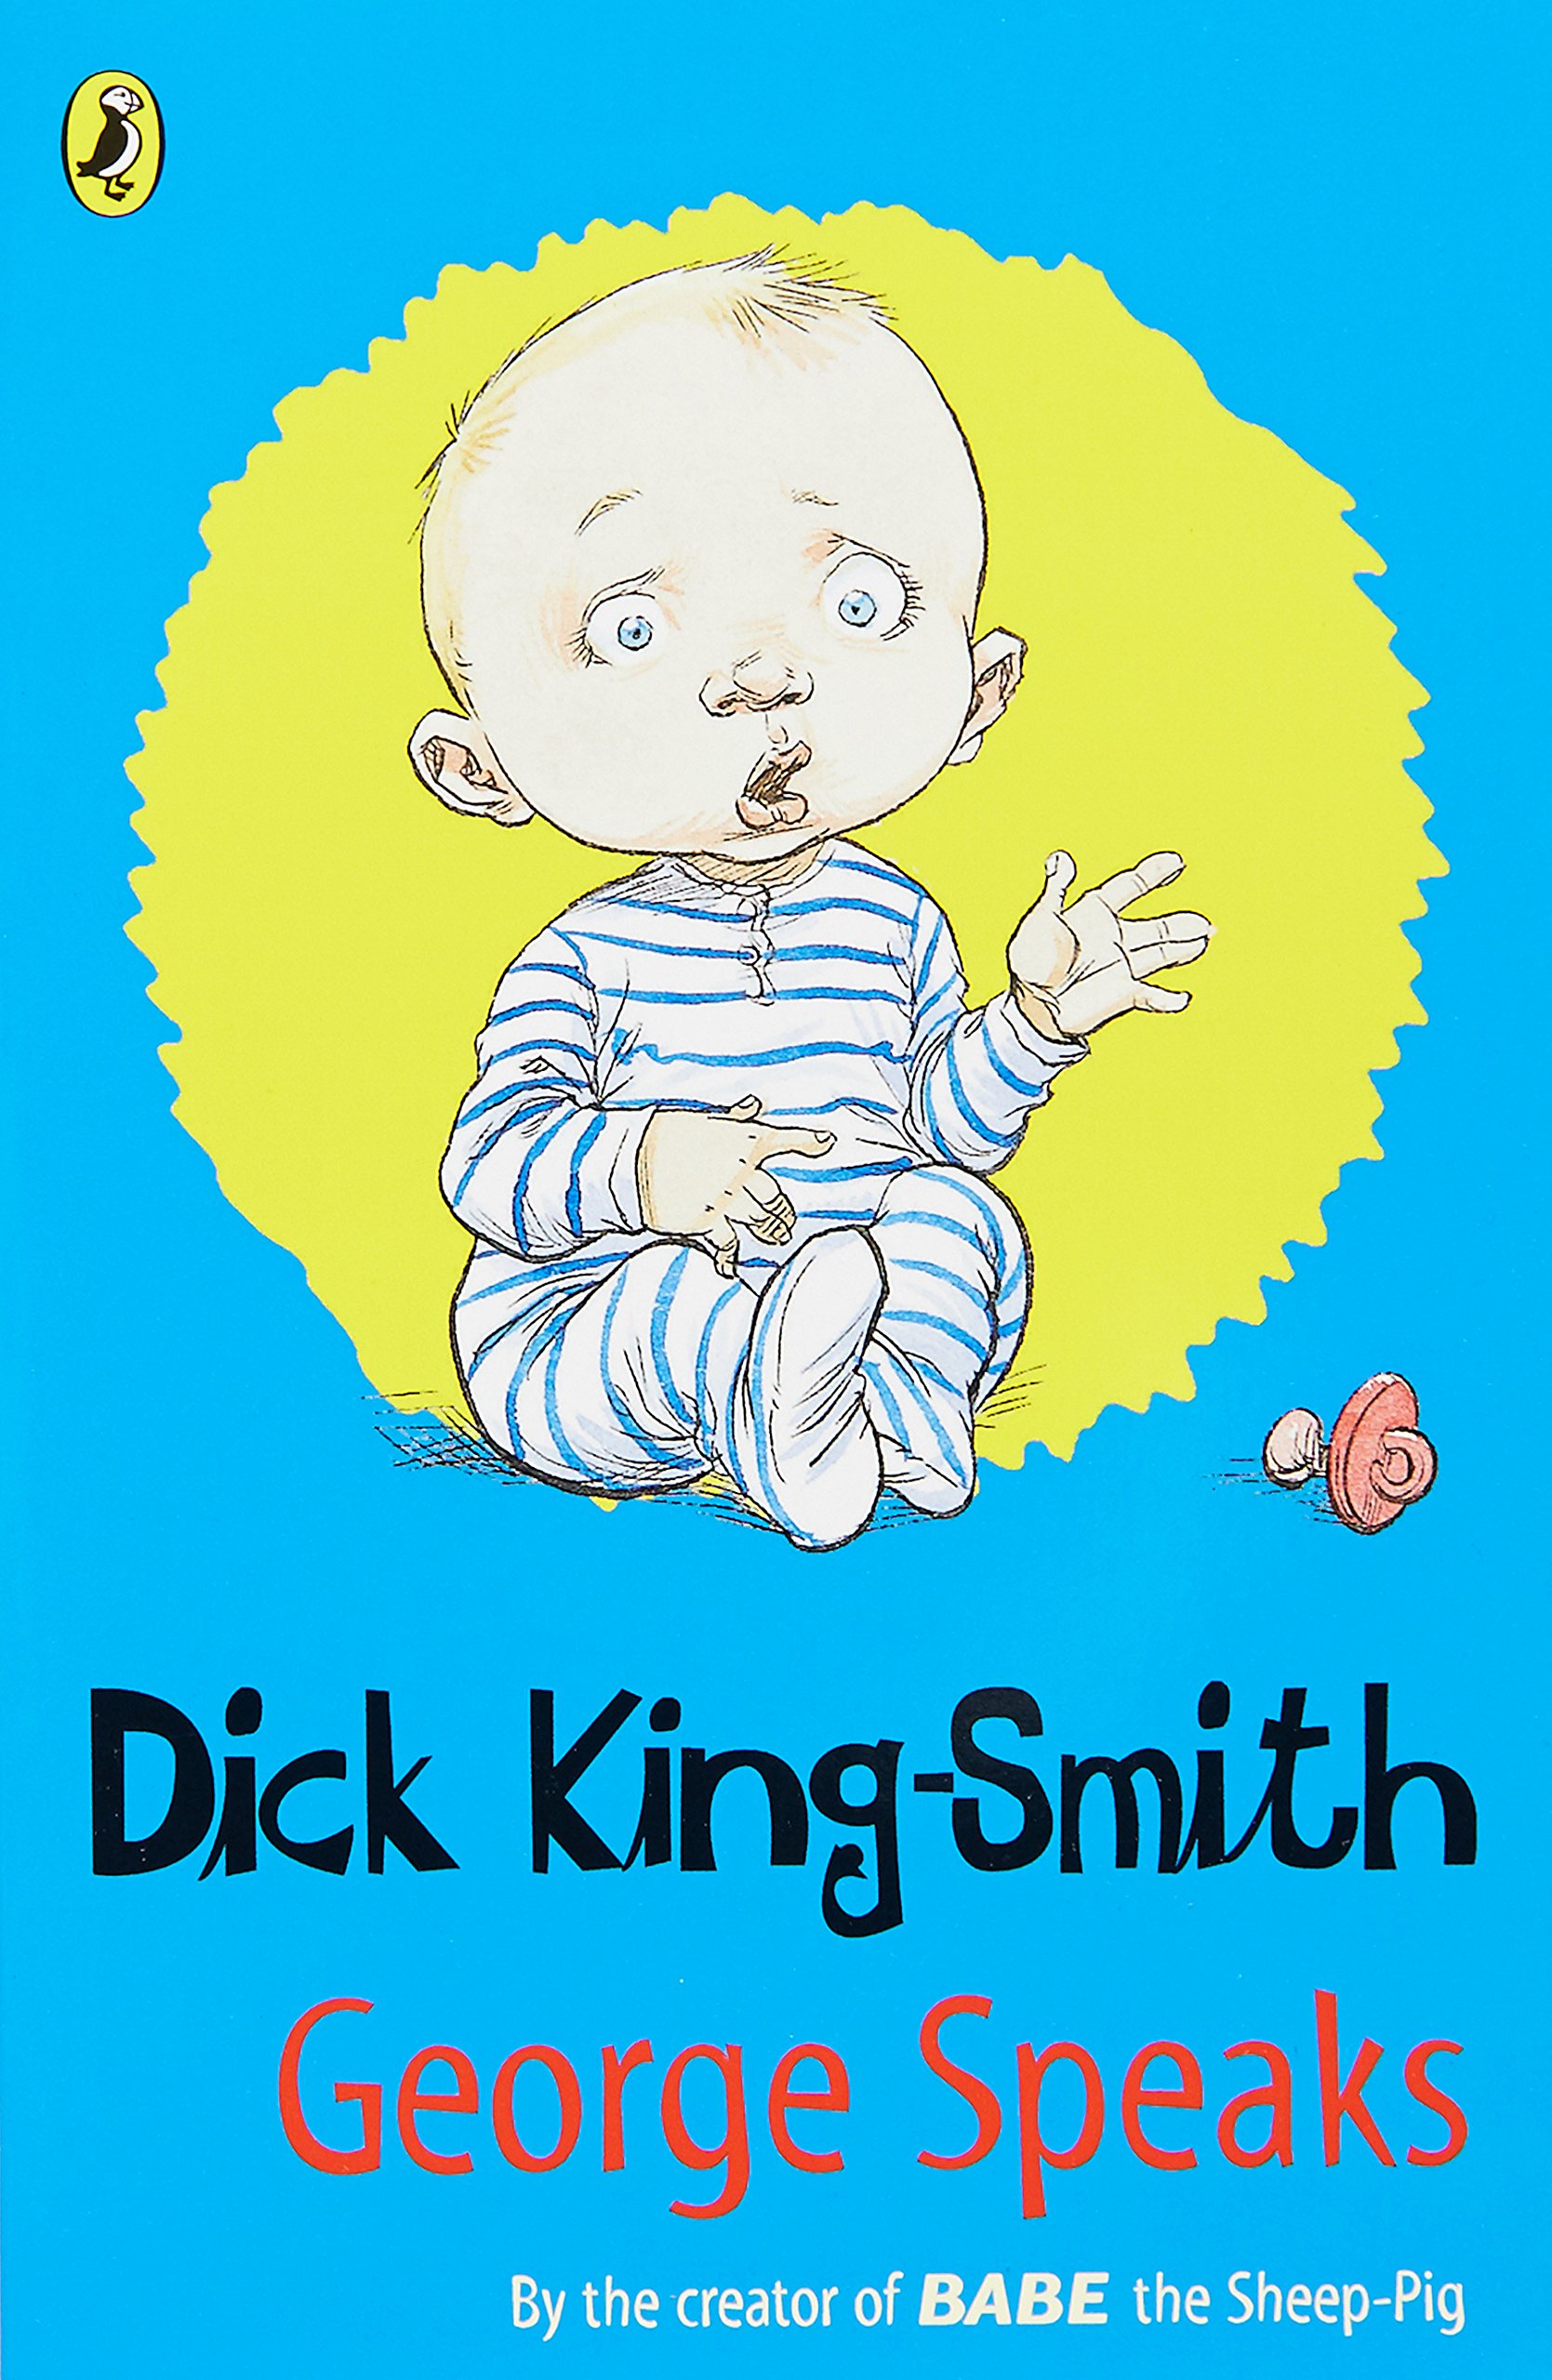 Cover of George Speaks by Dick King-Smith with a picture of a young baby